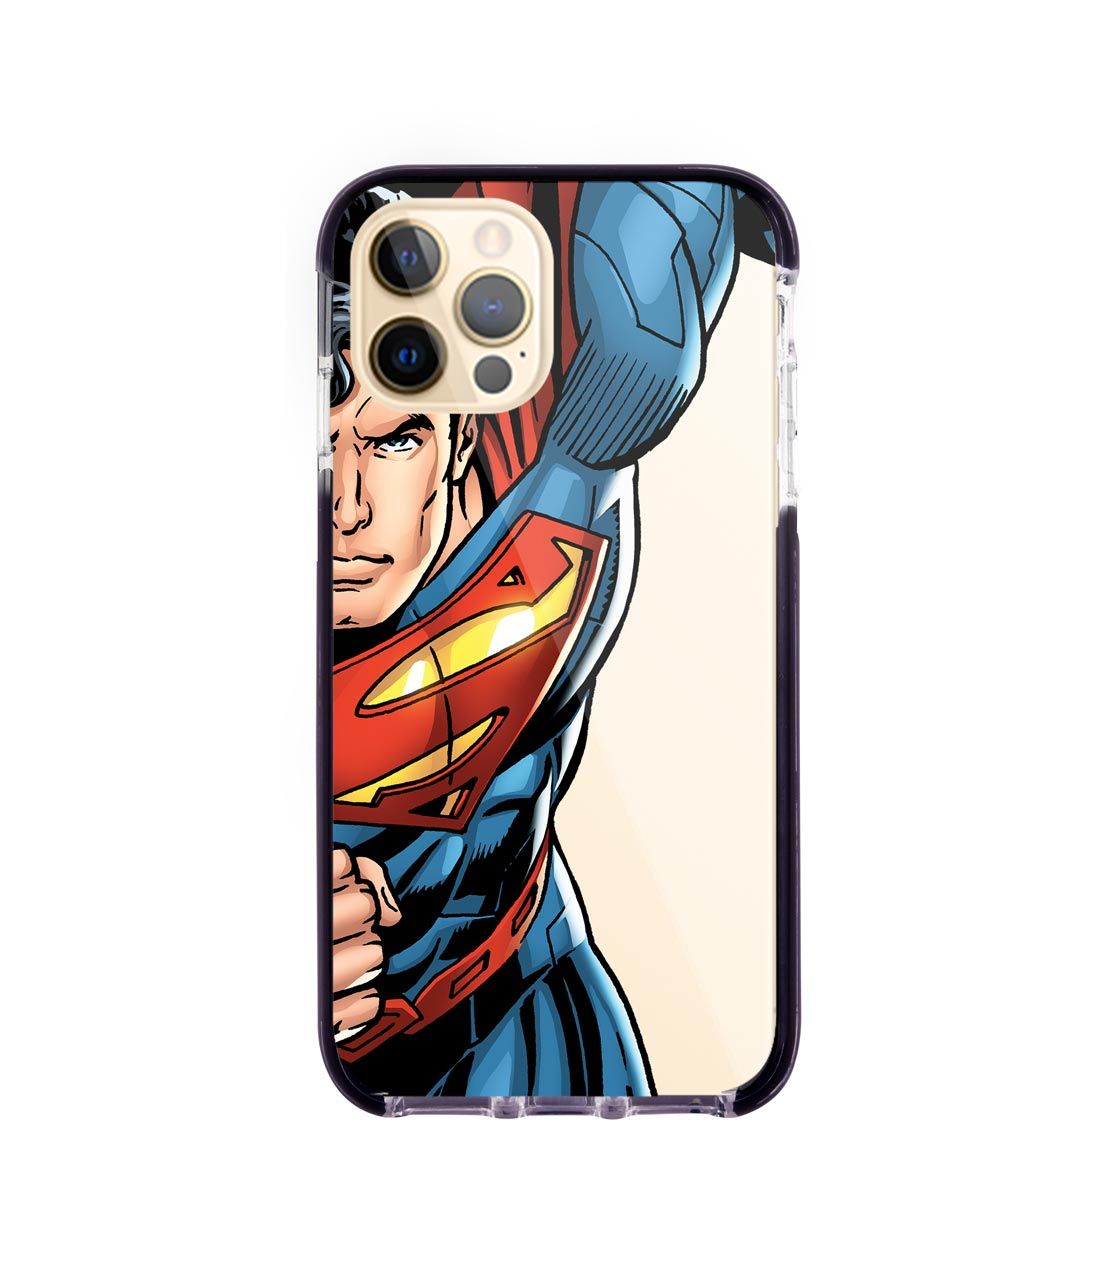 Speed it like Superman - Extreme Case for iPhone 12 Pro Max